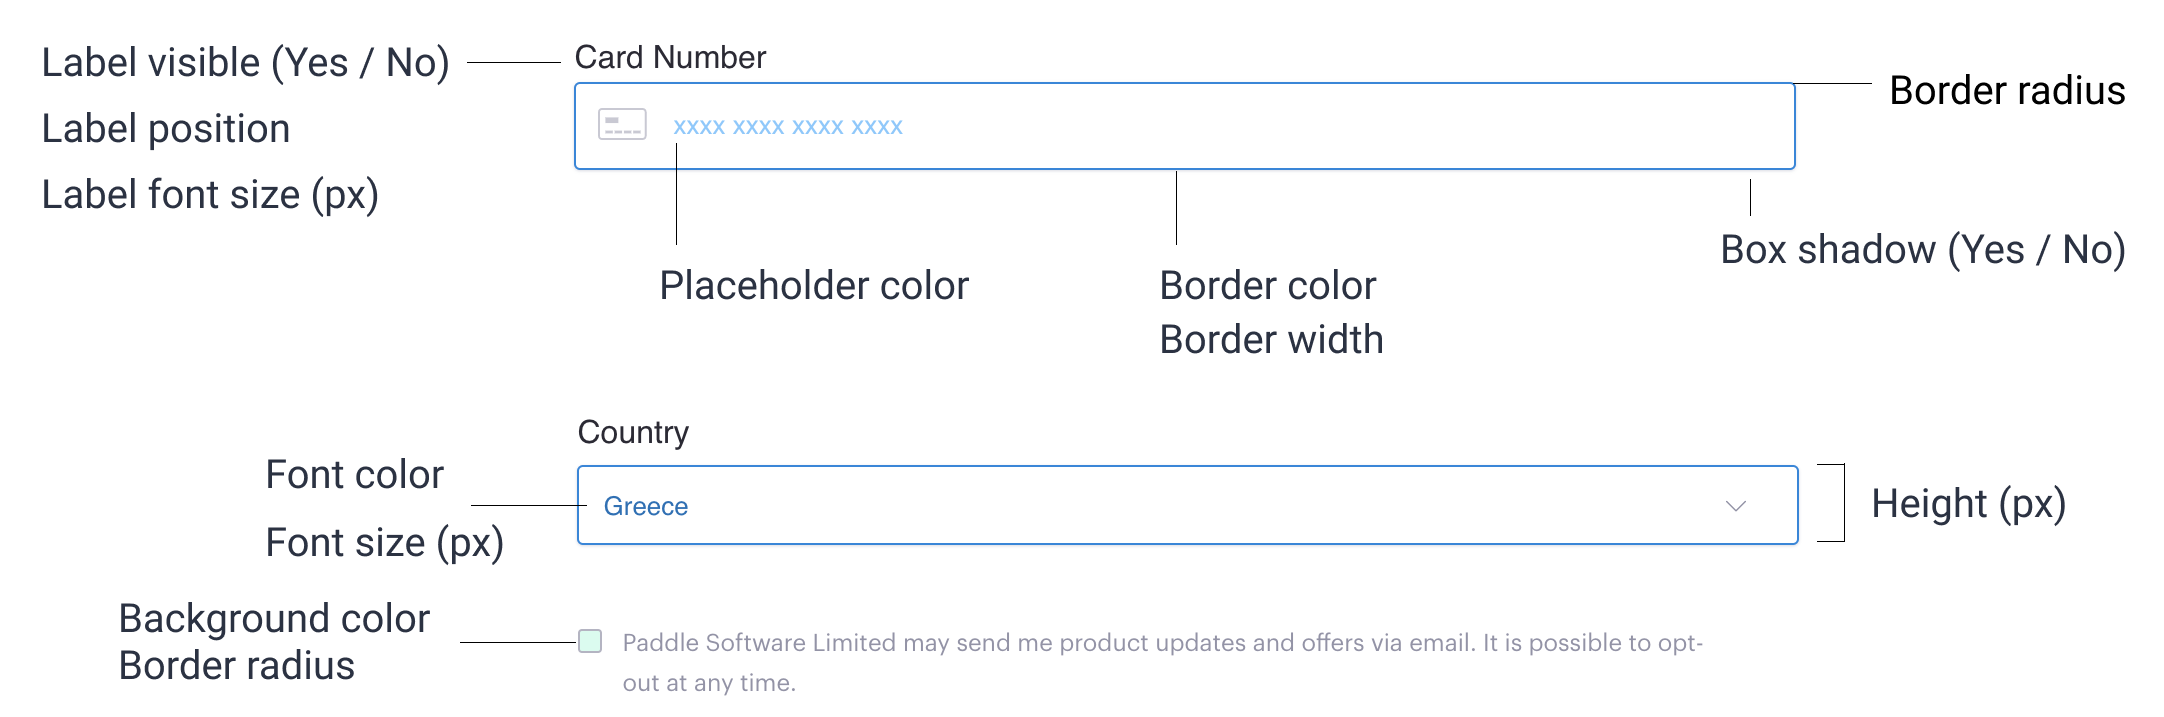 Illustration showing how fields in the customize screen relate to inputs on a checkout